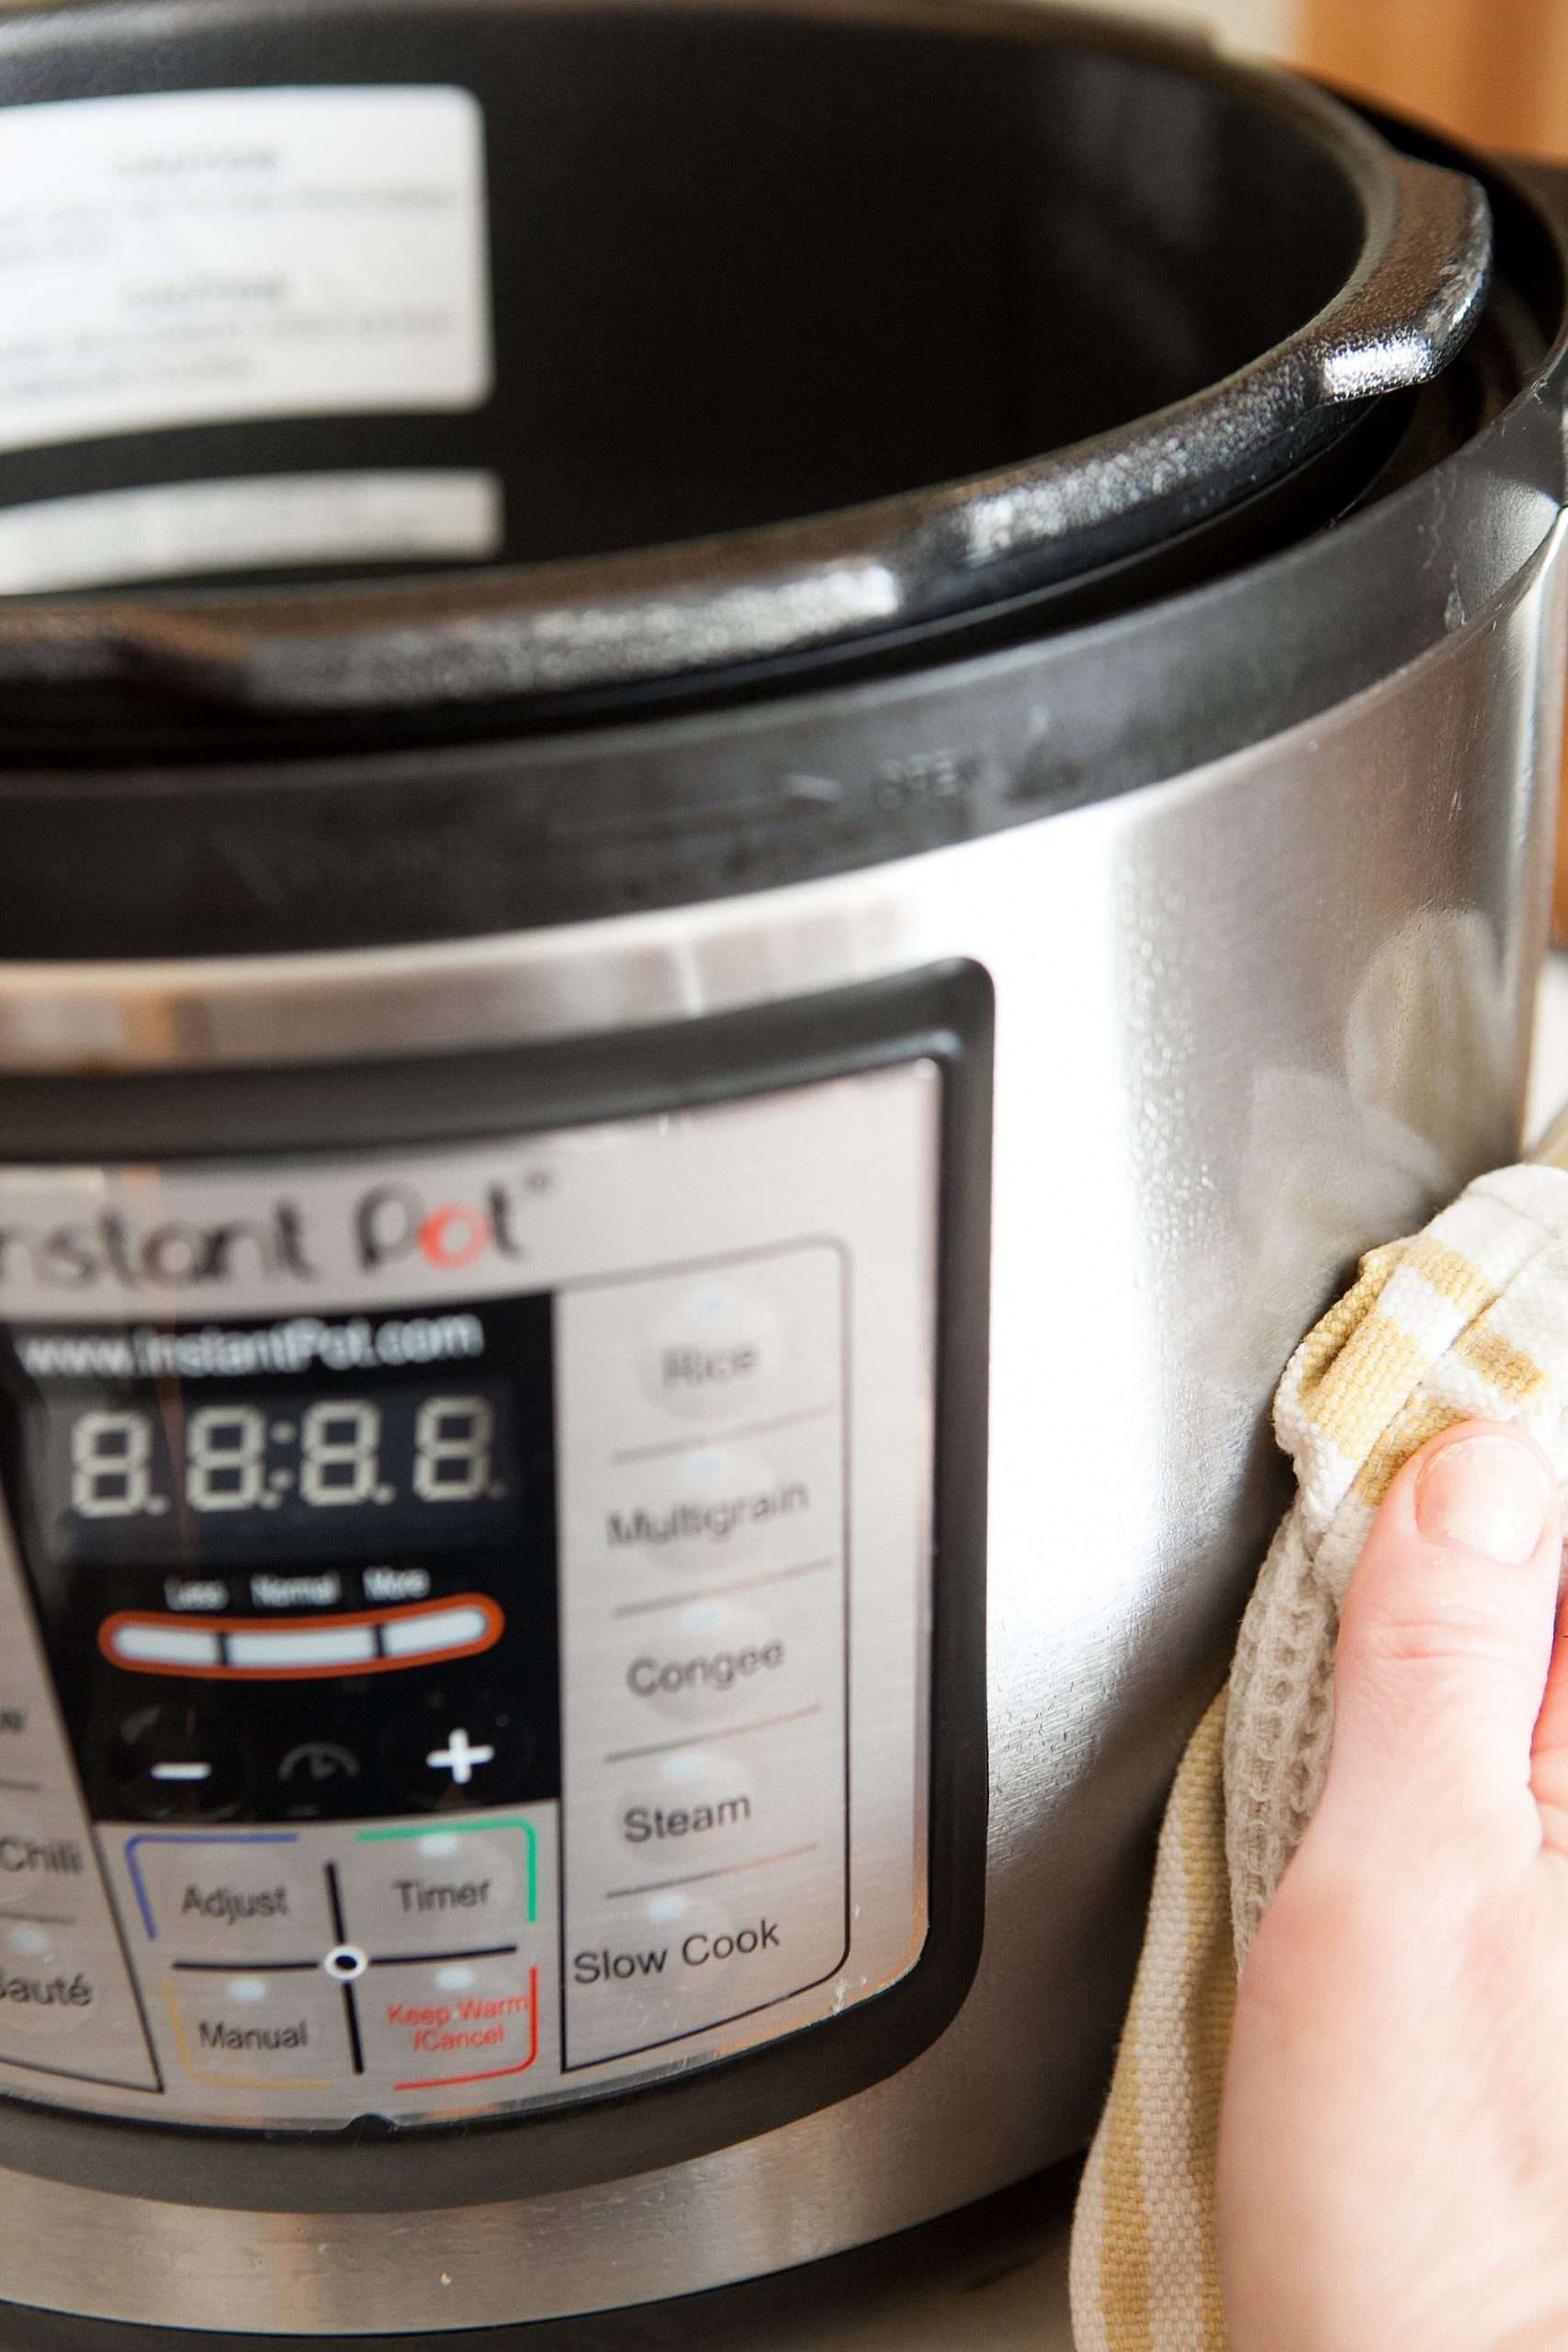 How To Clean an Instant Pot